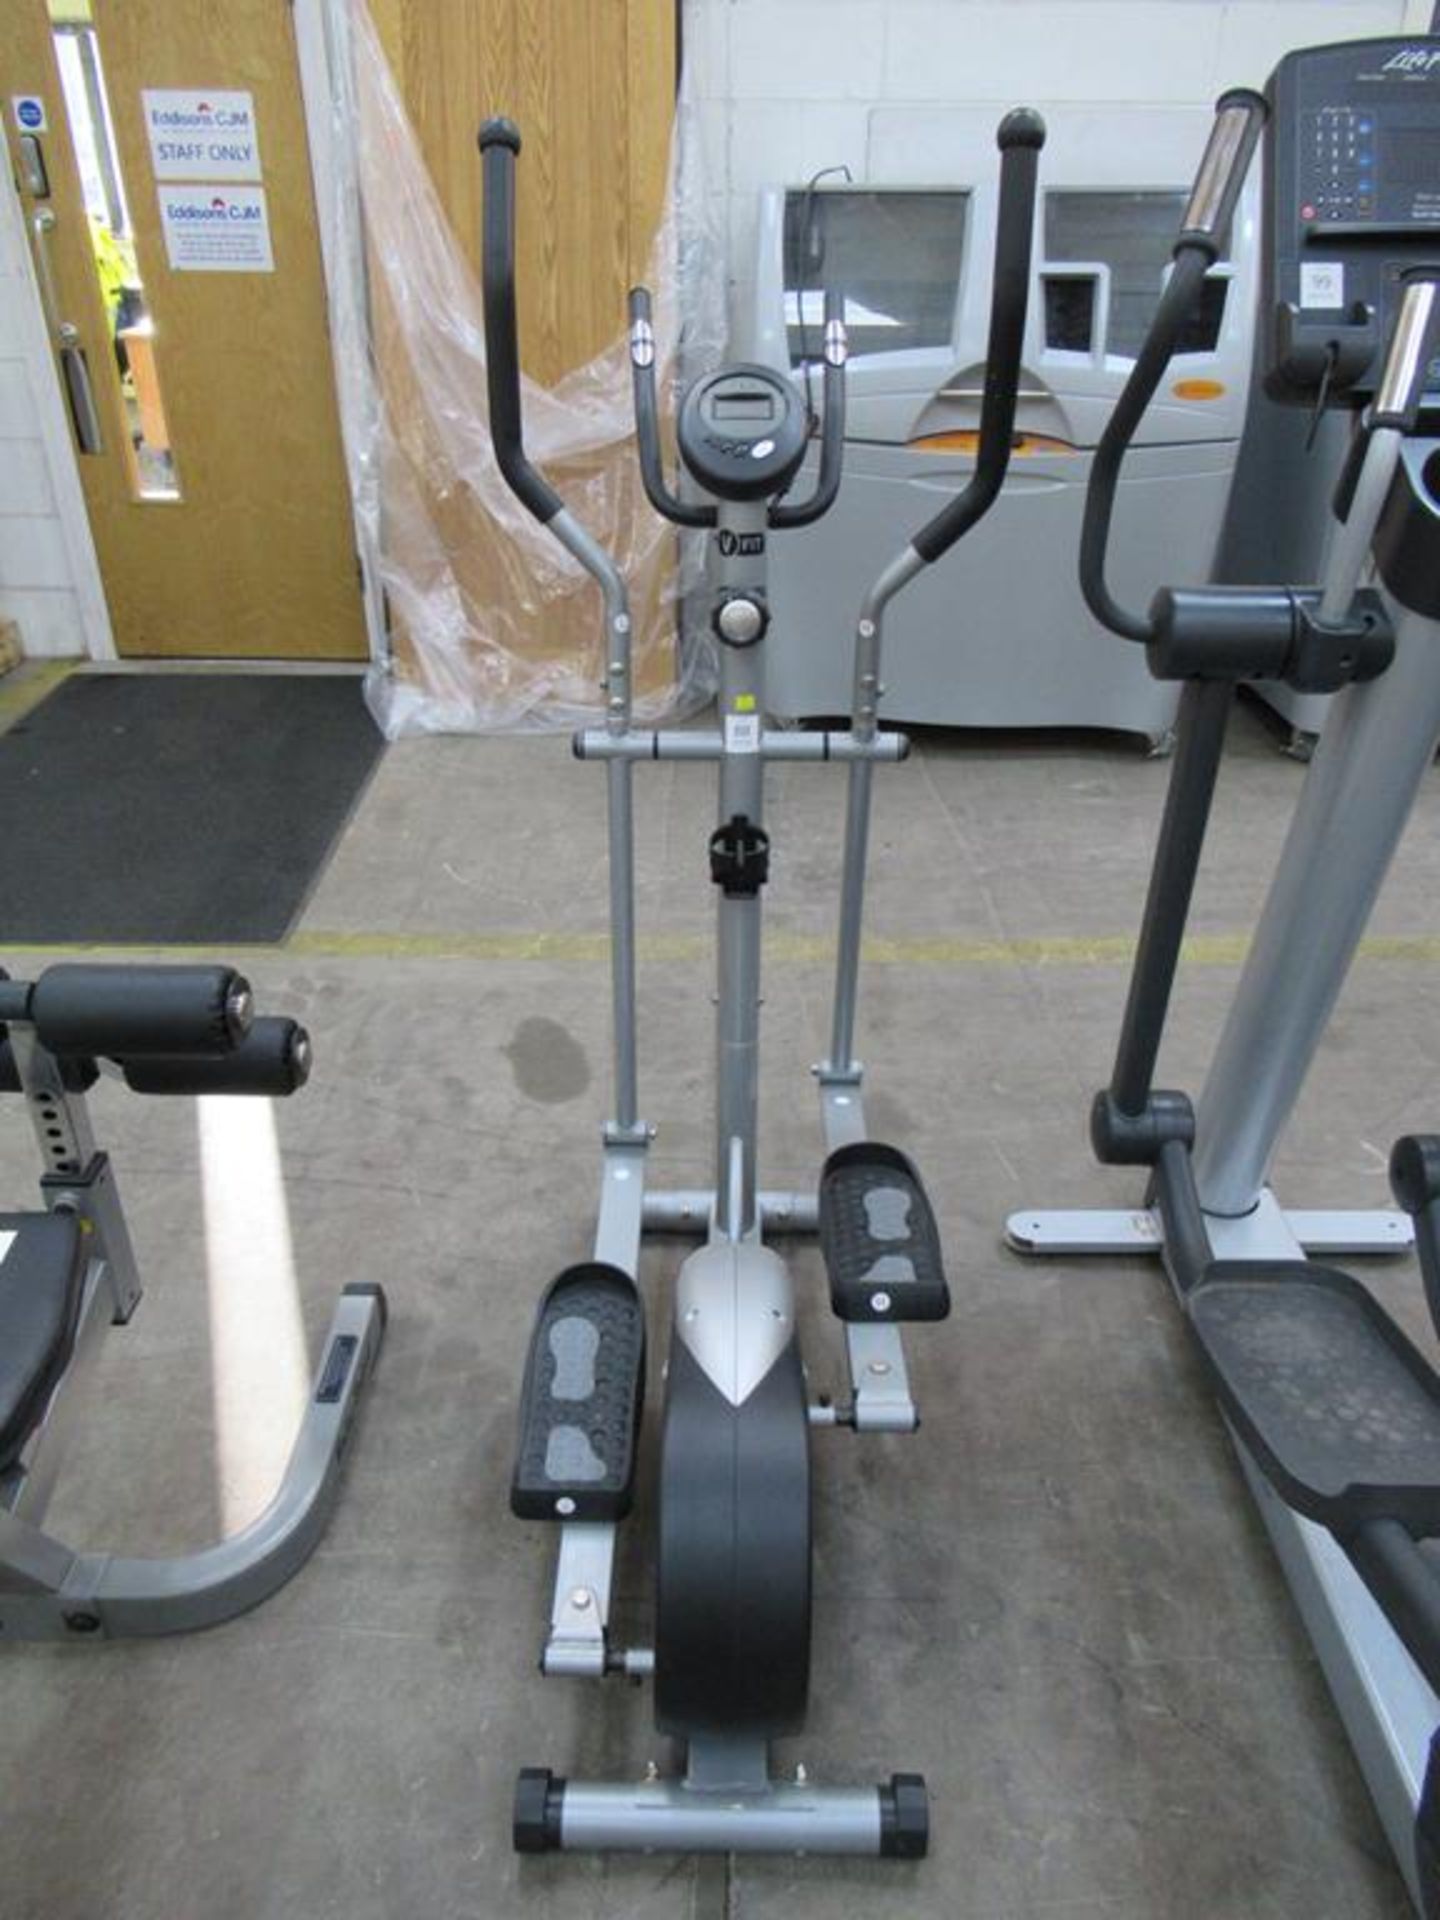 A V-Fit Cross Trainer